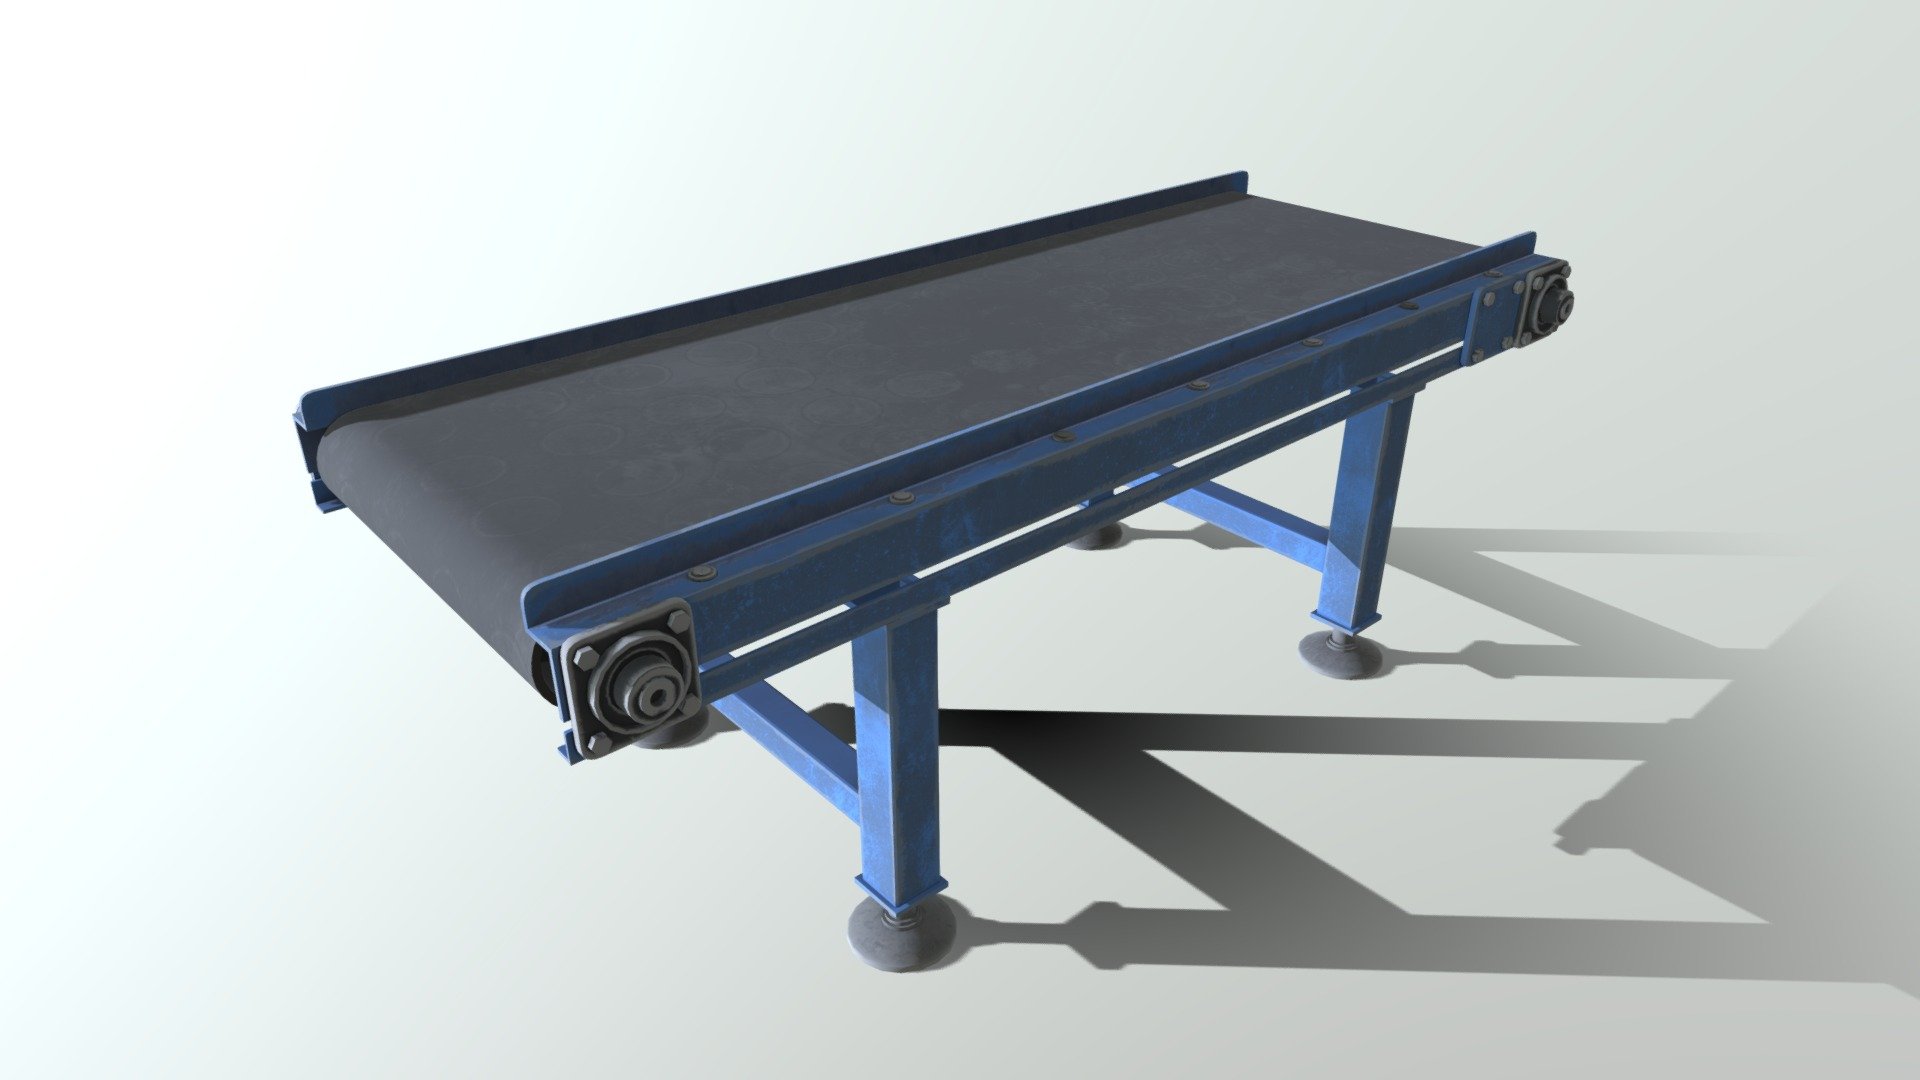 Straight conveyor belt The parts of which it is composed are separated for easy configuration in games 3d model